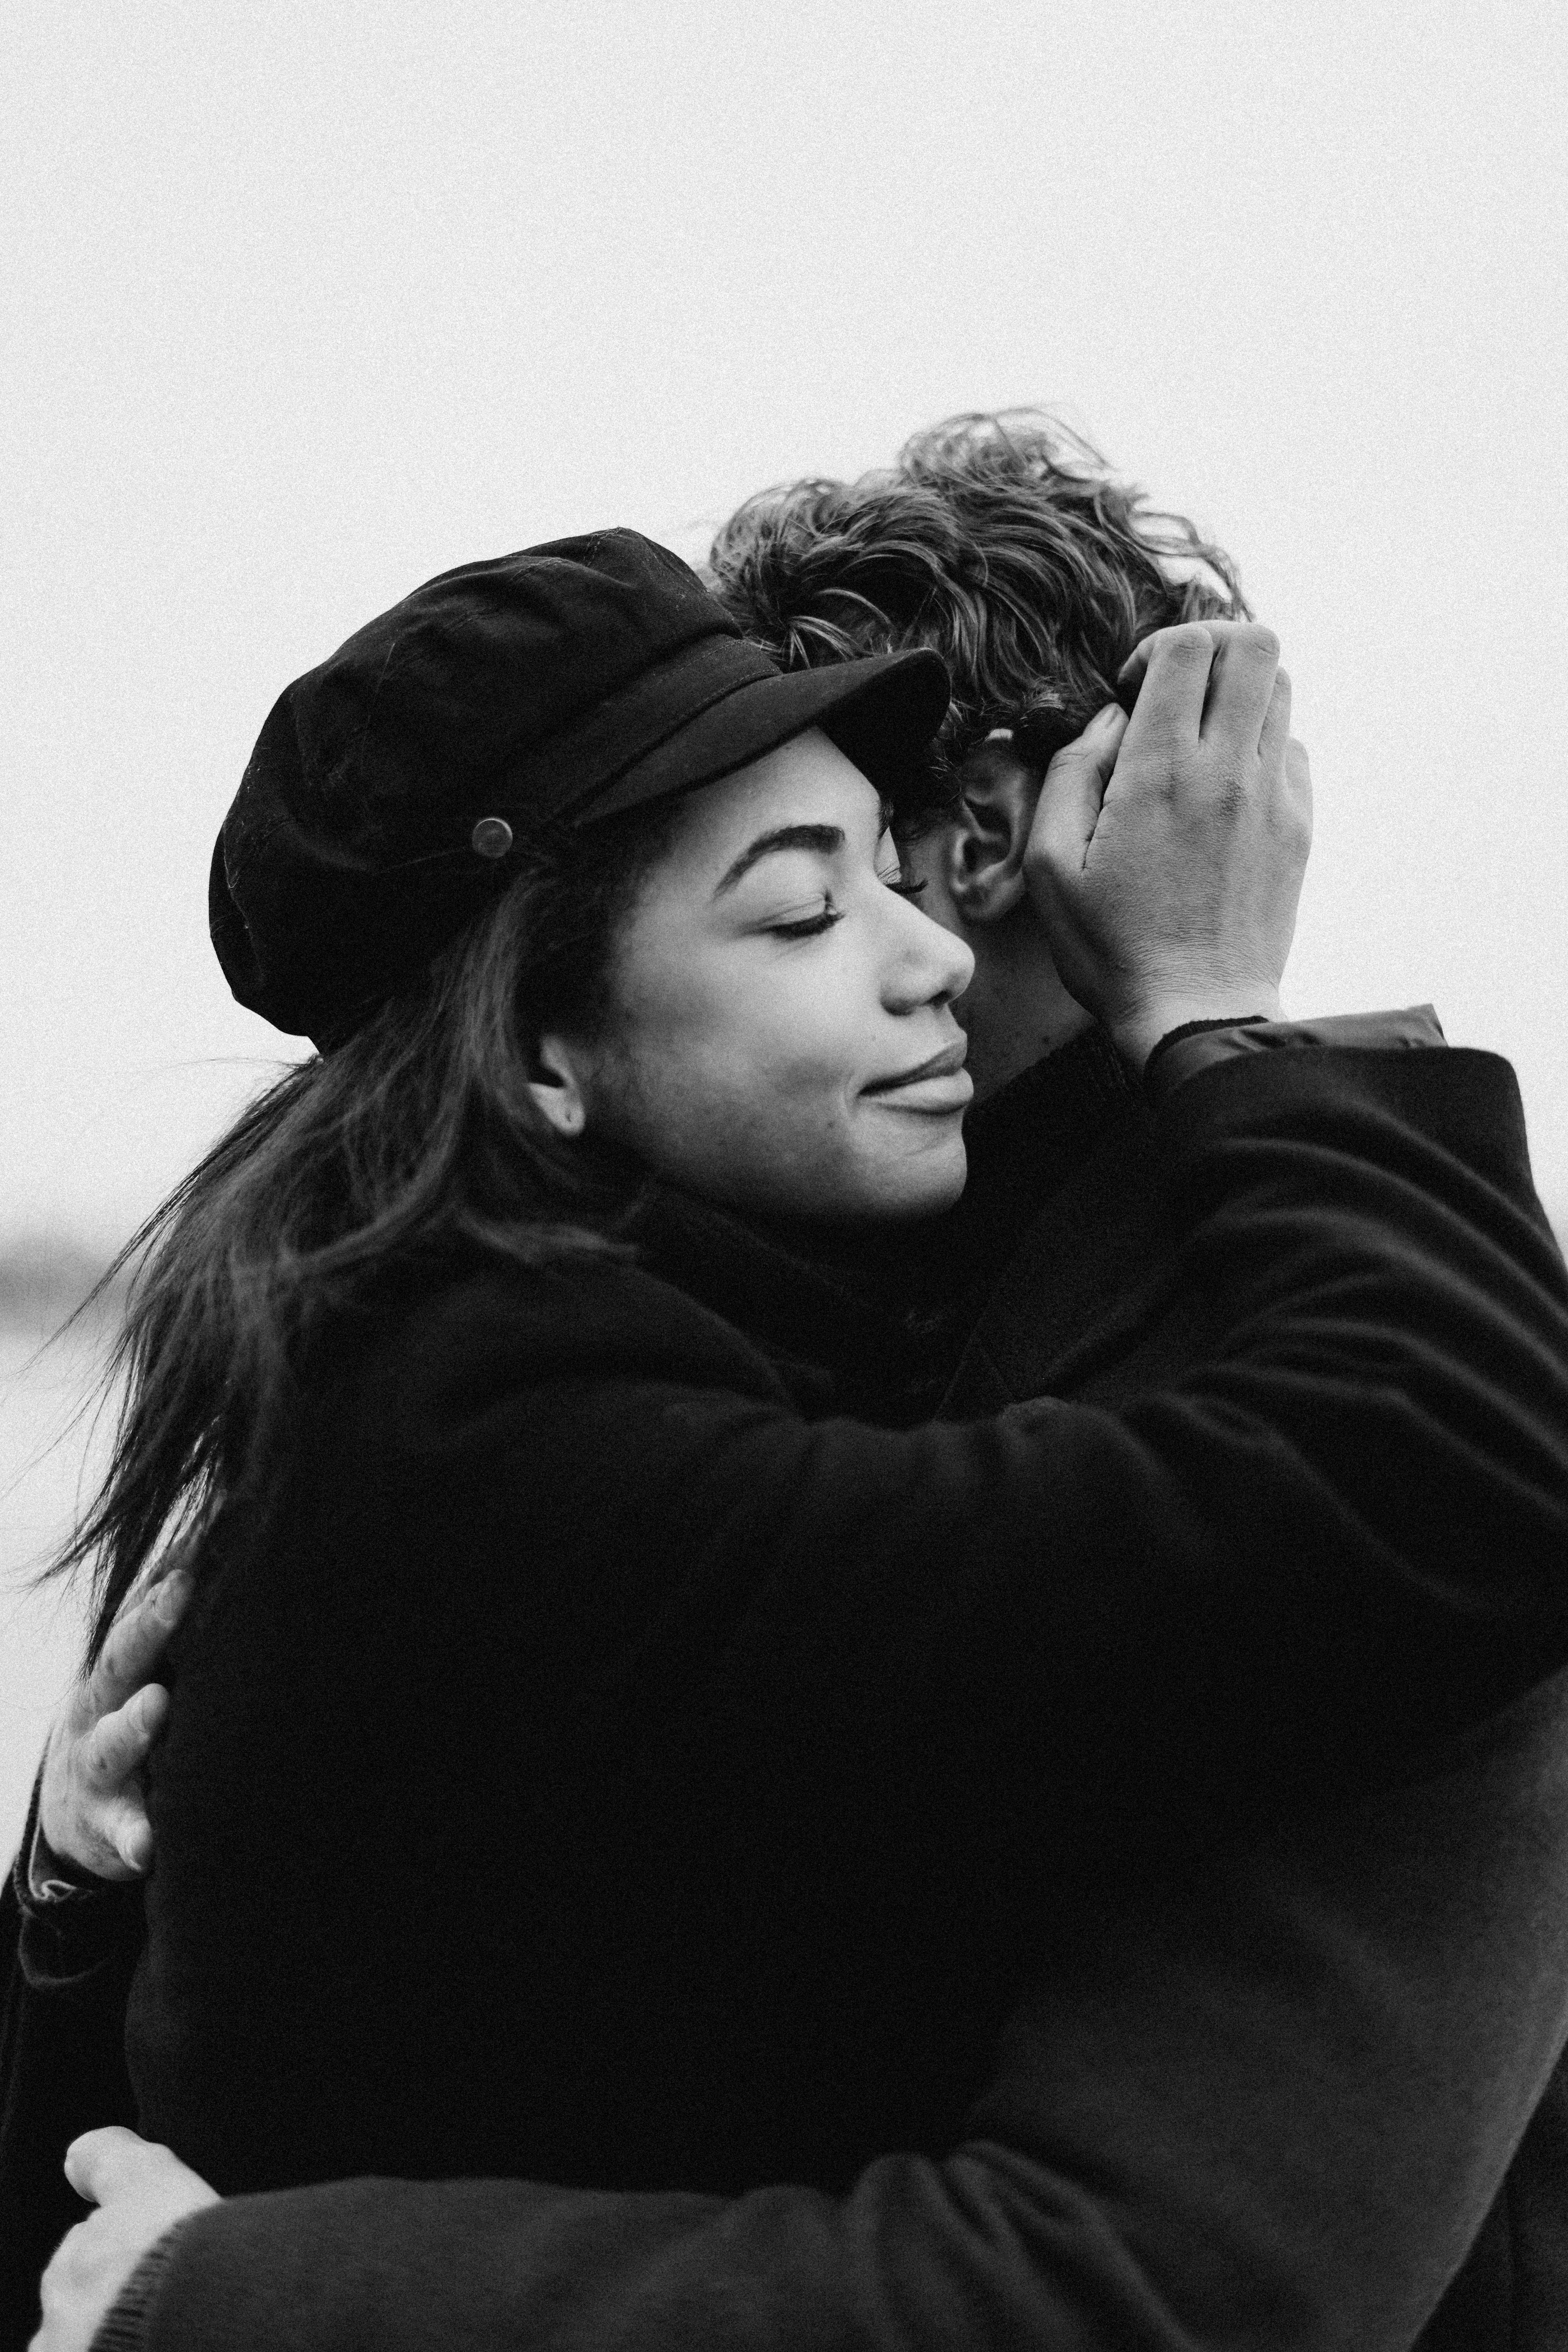 A couple hugging each other | Source: Pexels